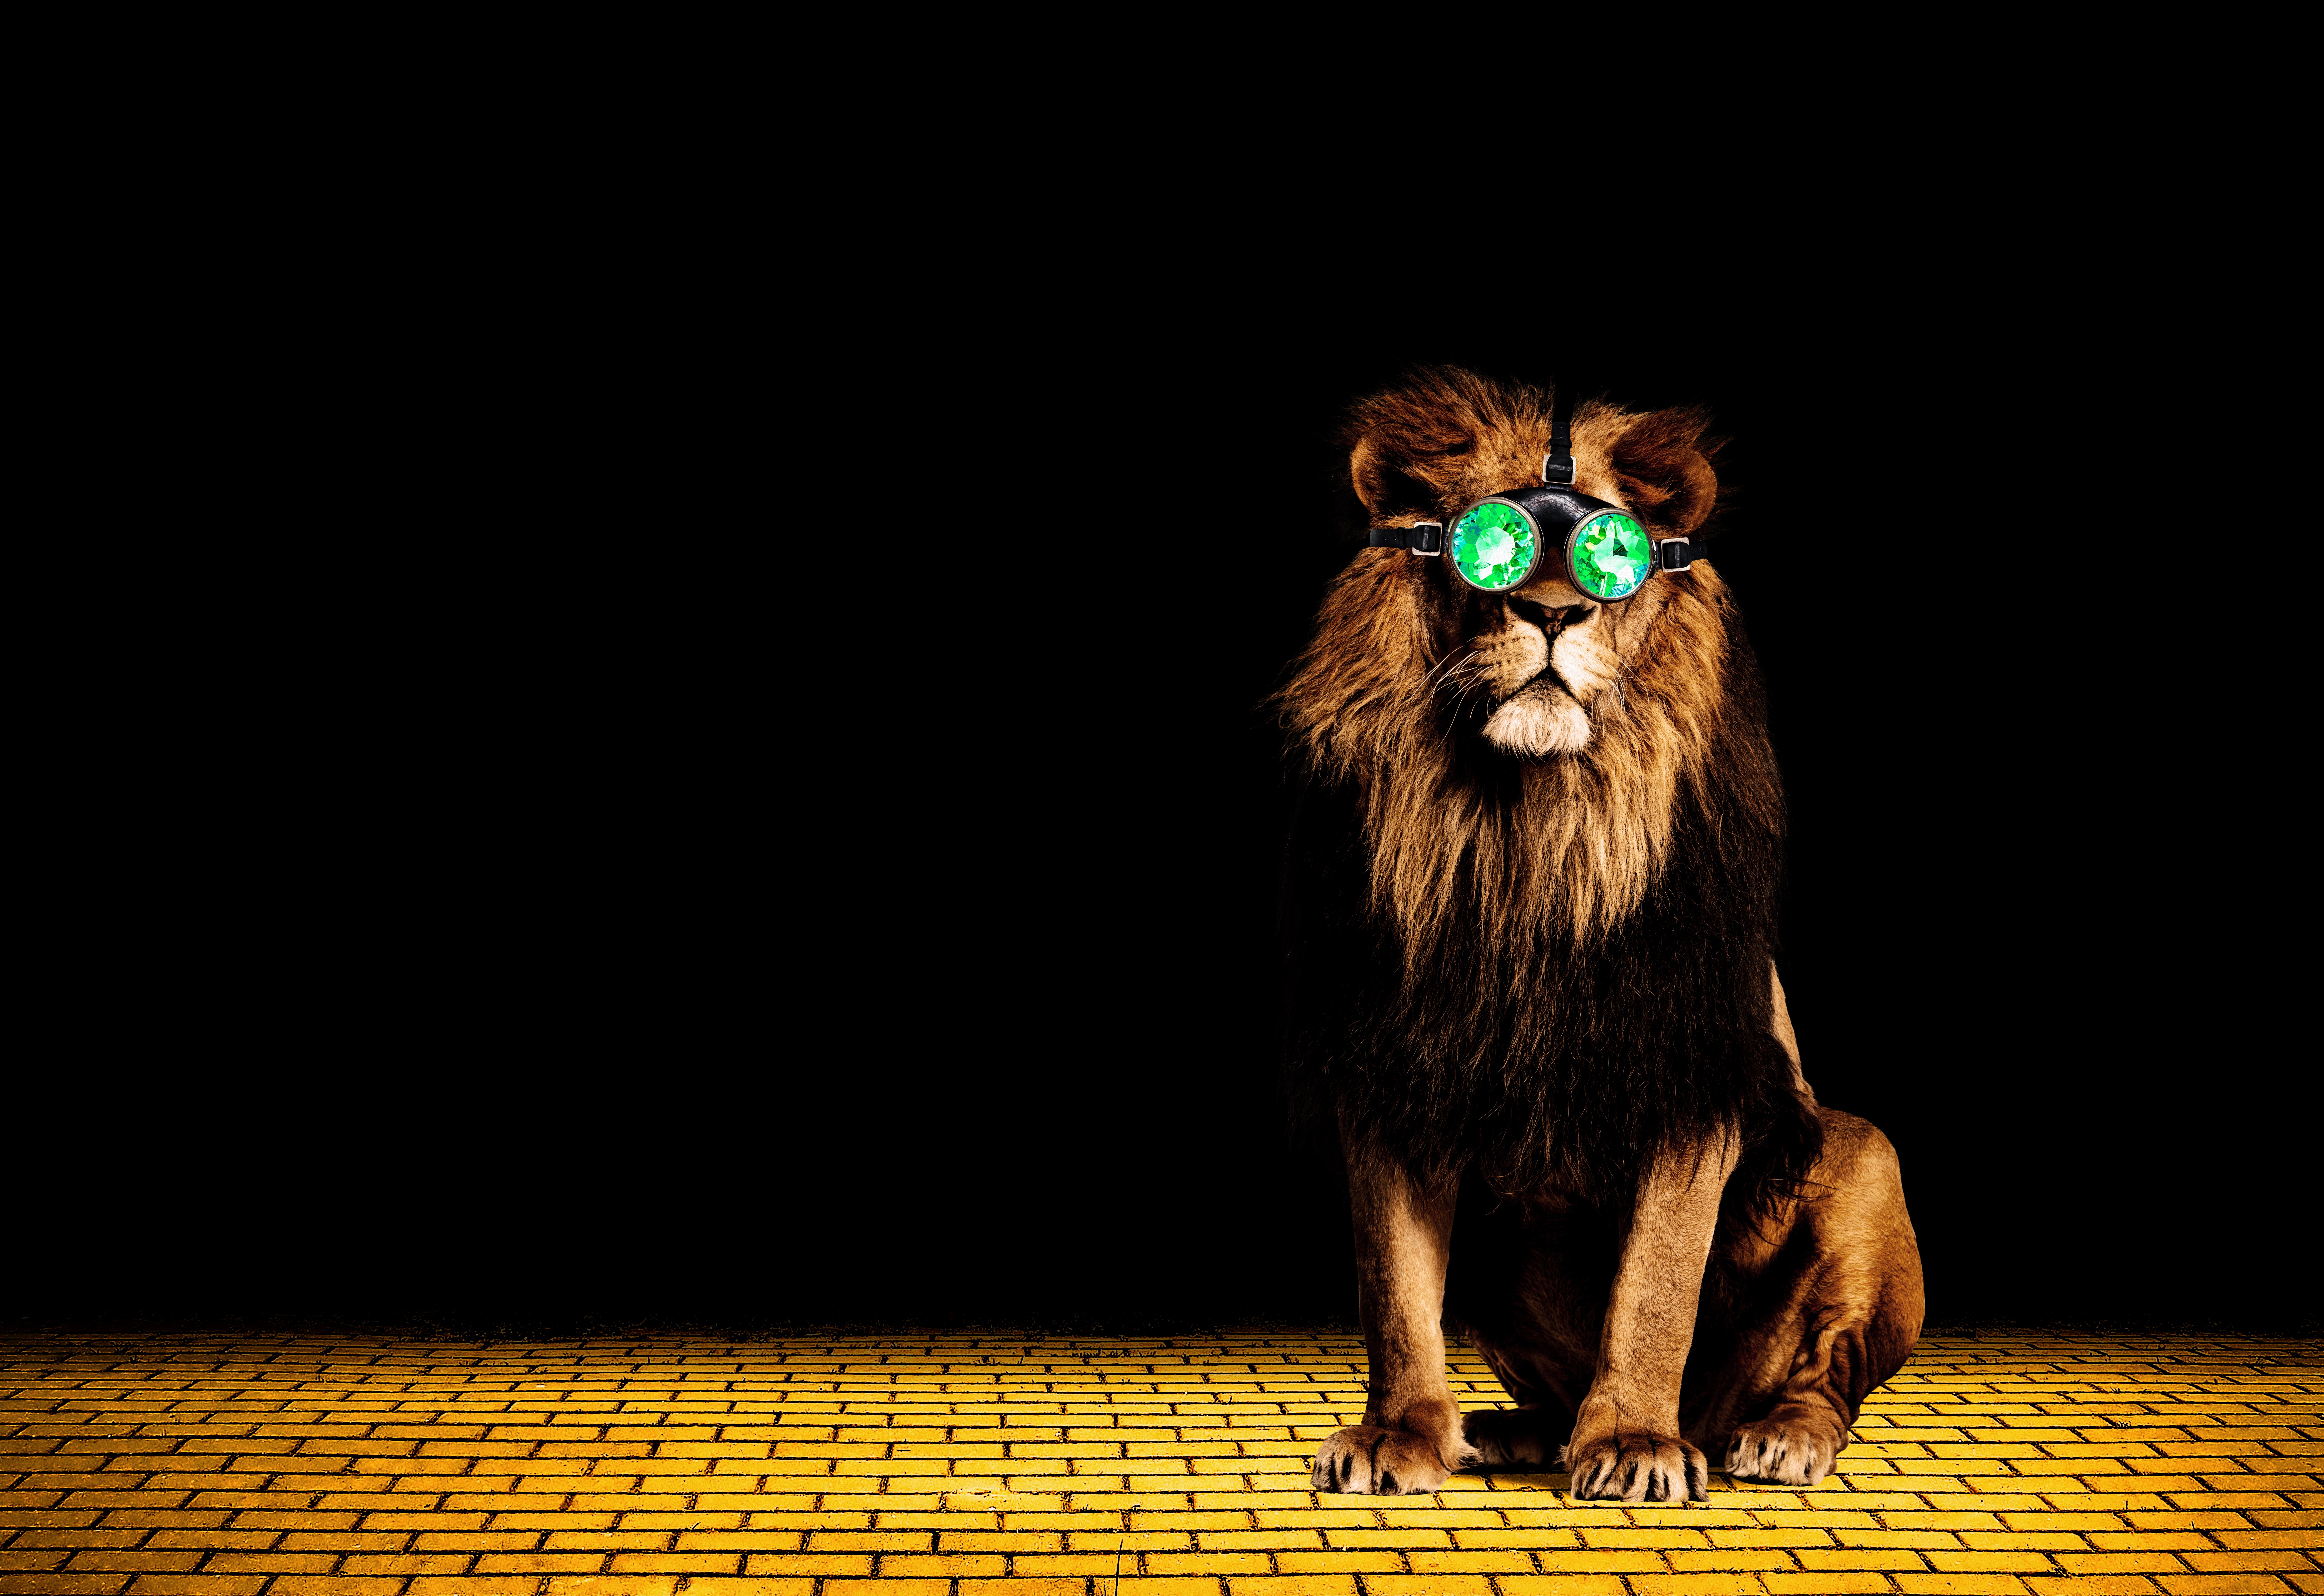 A lion wearing green goggles sits on a yellow brick road.